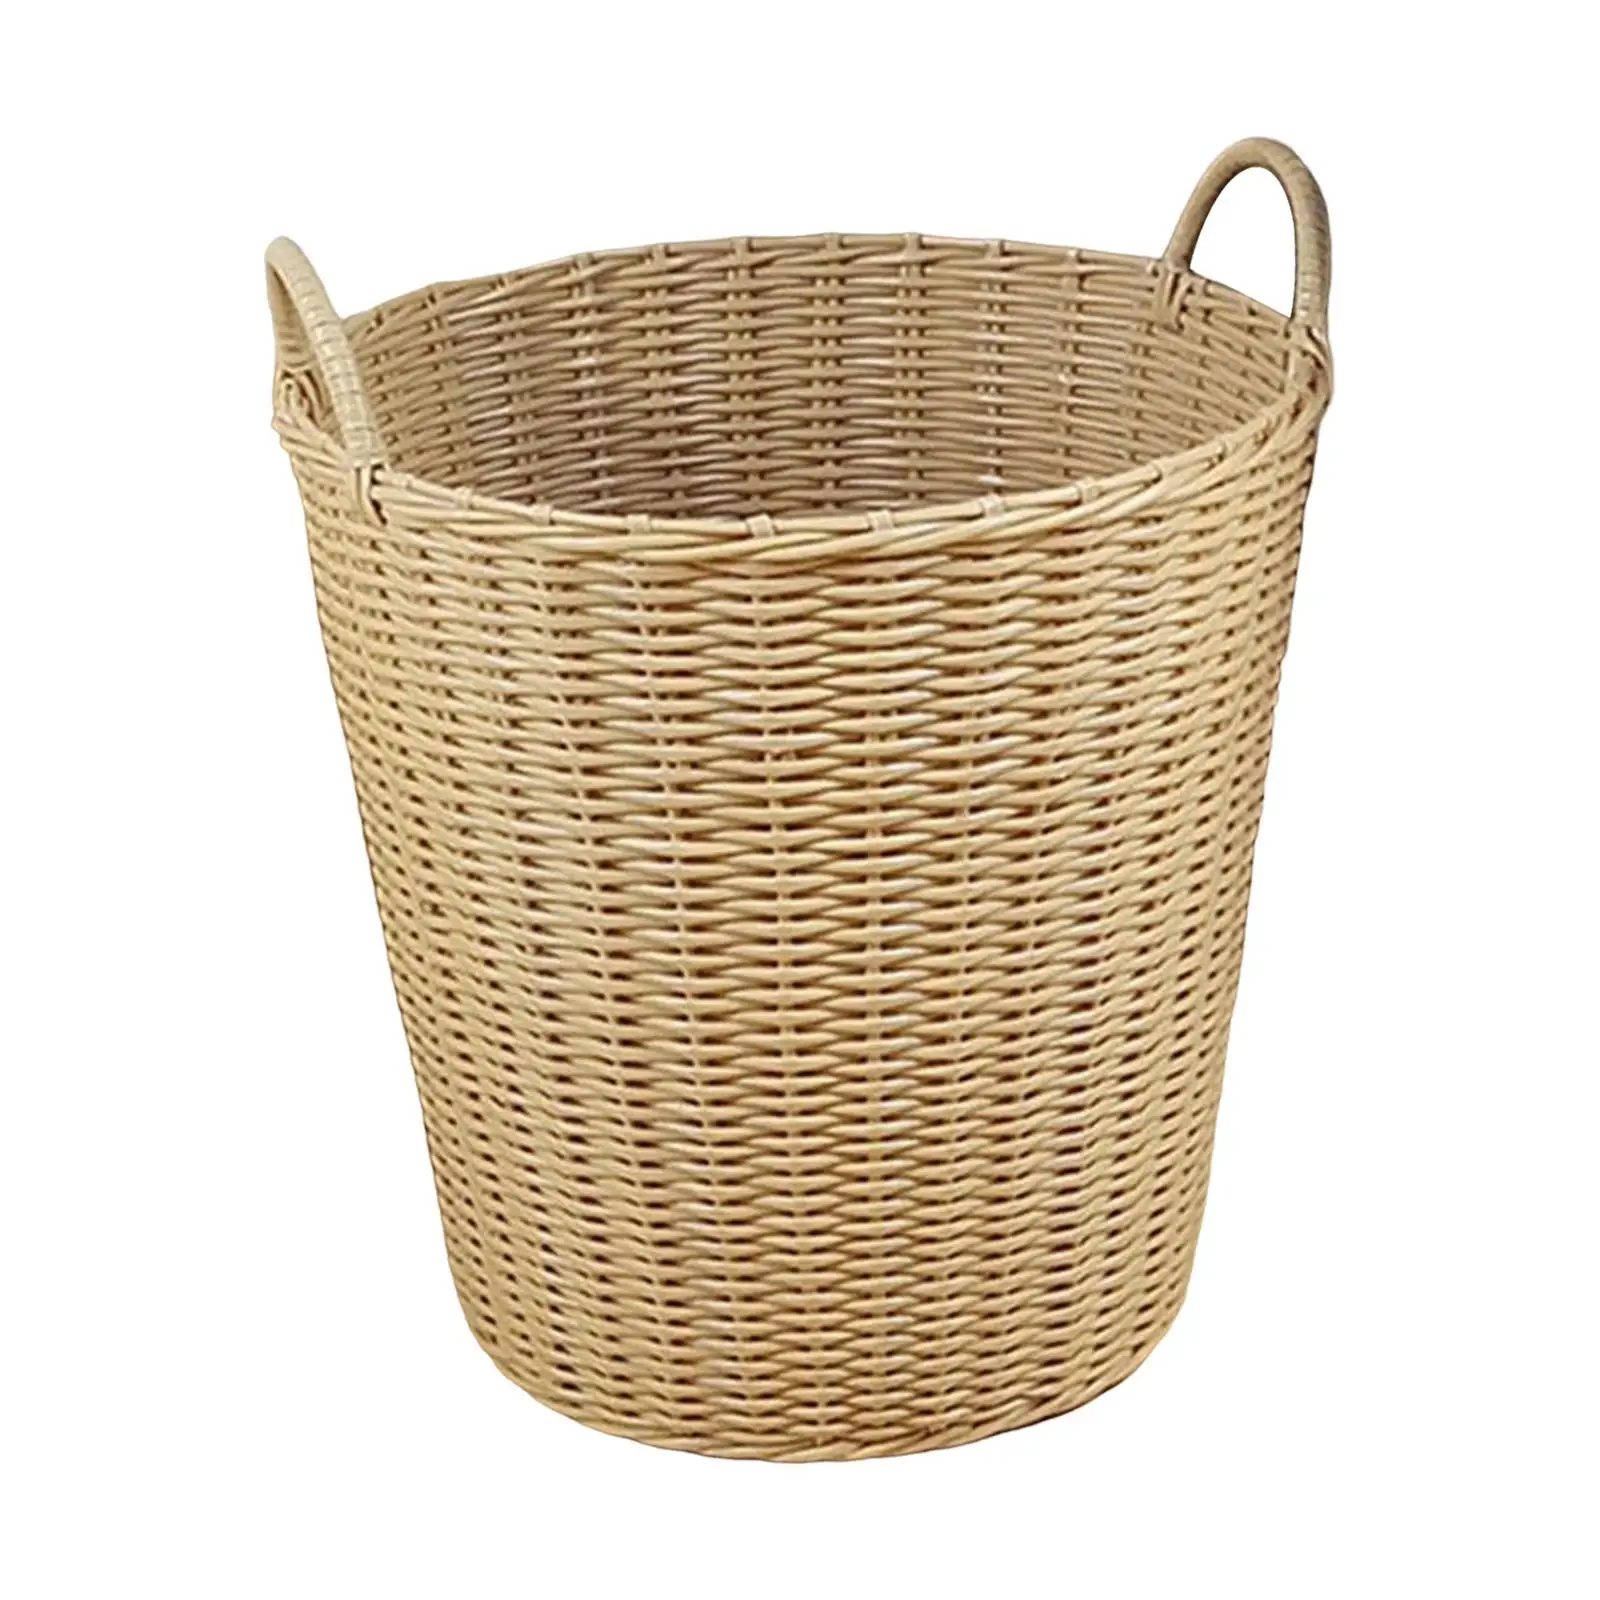  Basket Bins, with Handles, Freestanding Tall Large Laundry Basket,